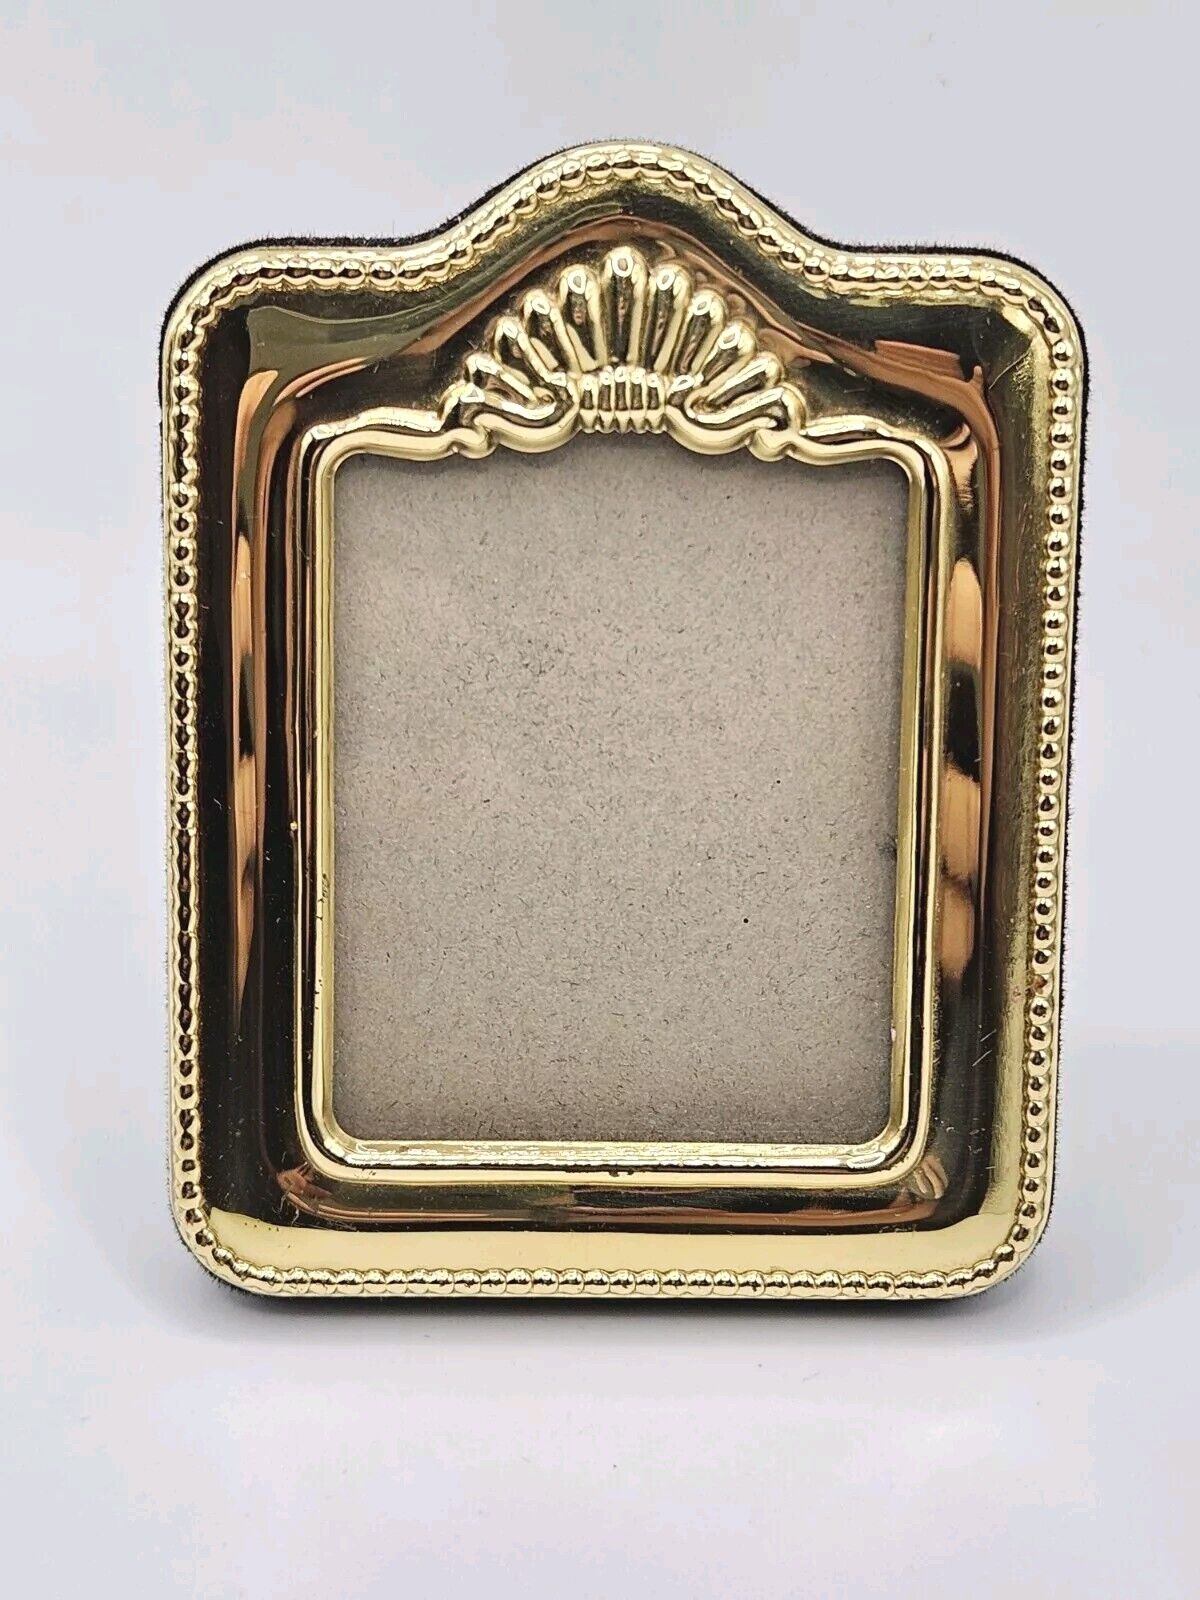 Vintage Elegance Solid Brass Ornate Small Picture Frame 2 x 3 Inches